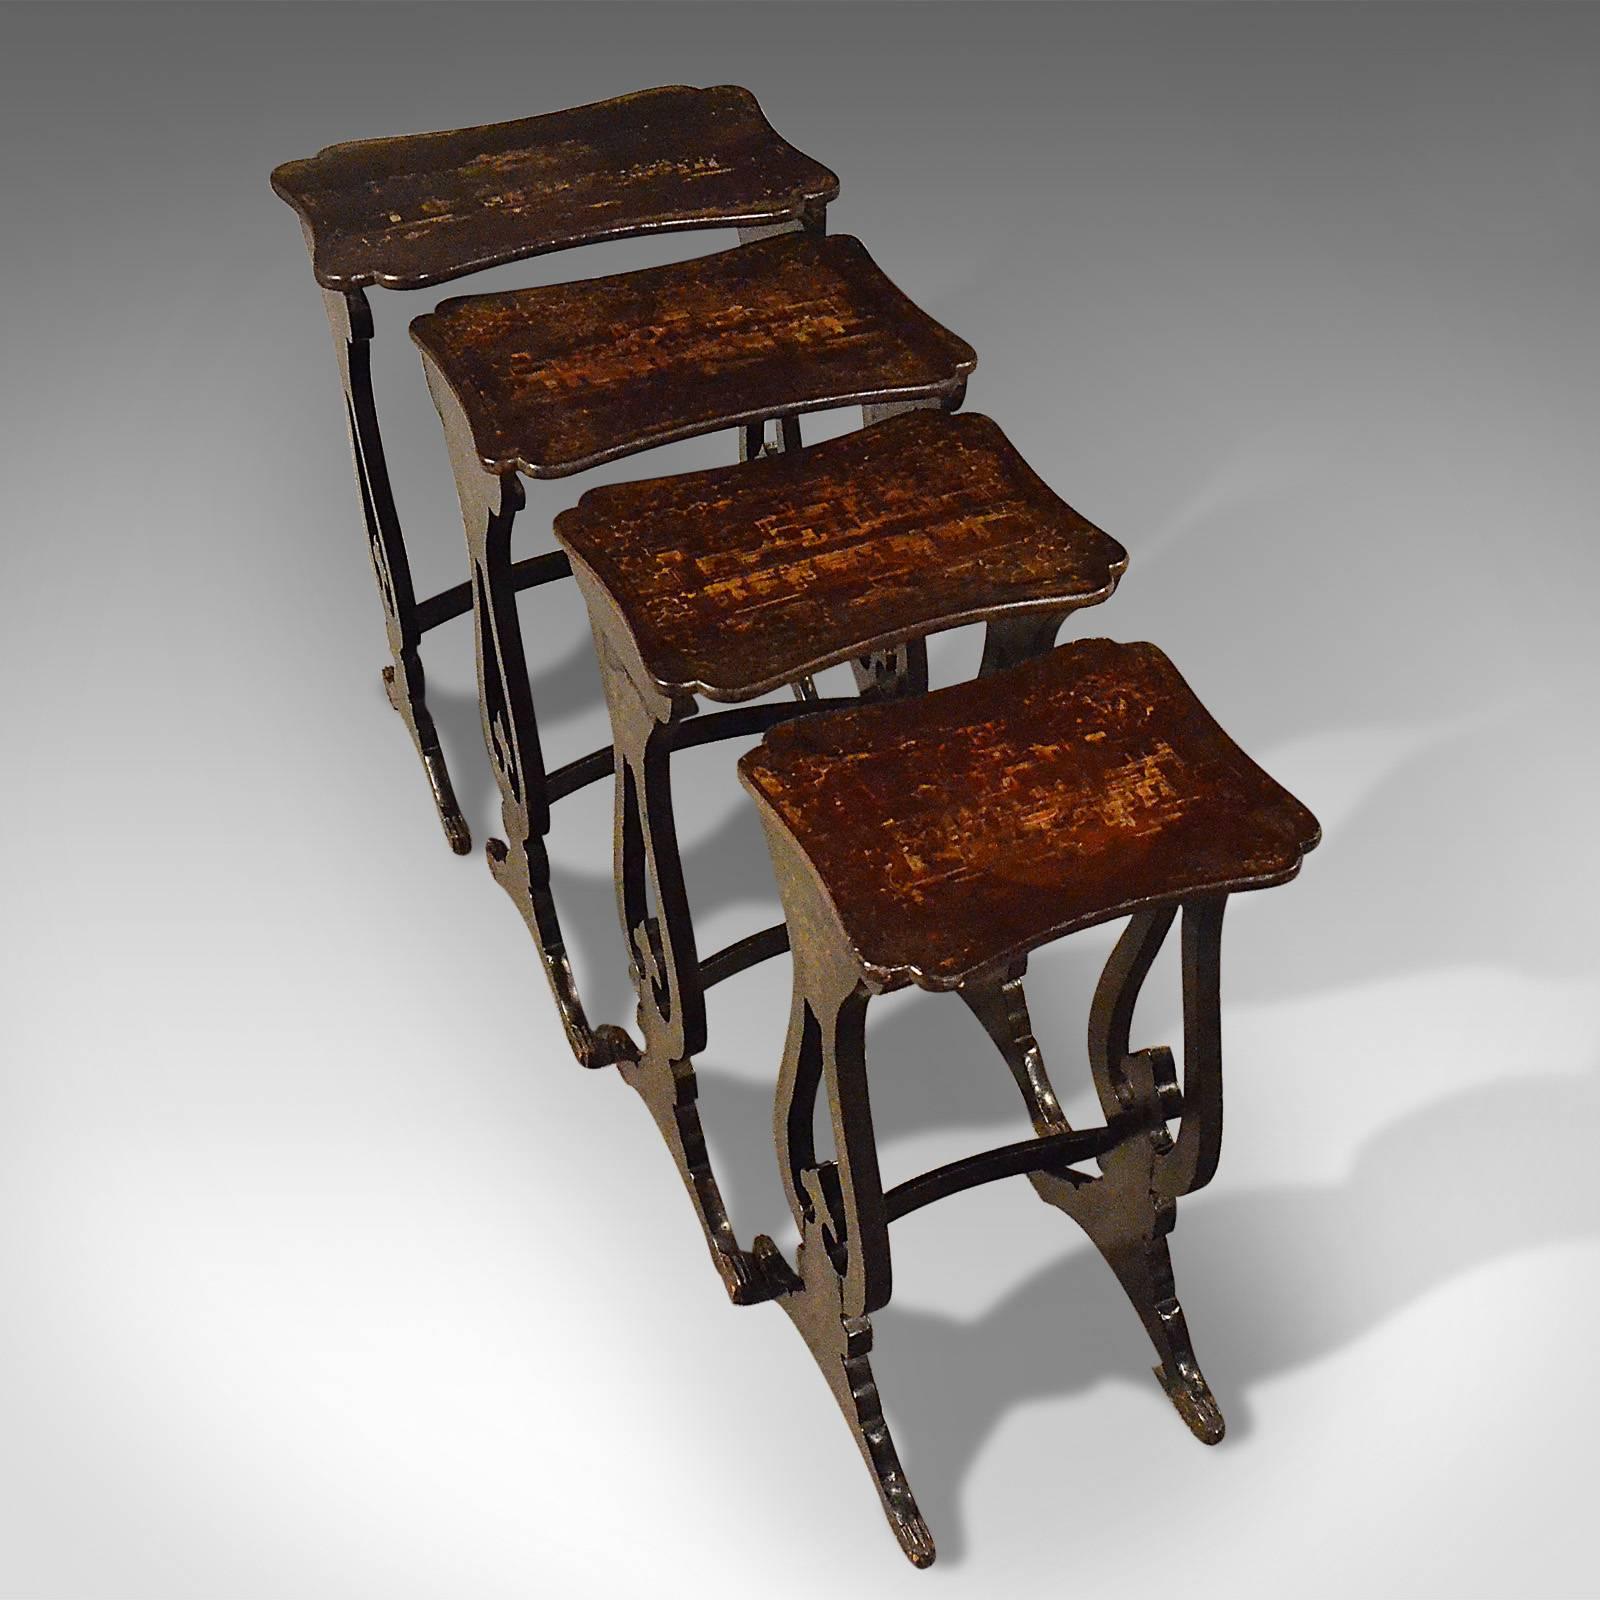 This is an antique nest of tables, four Chinoiserie ebonized and Japanned side tables from the 19th century, circa 1890.

Of quality craftsmanship, strongly jointed and robust
Hand decorated with fine gilt paint detailing throughout 
Depicting